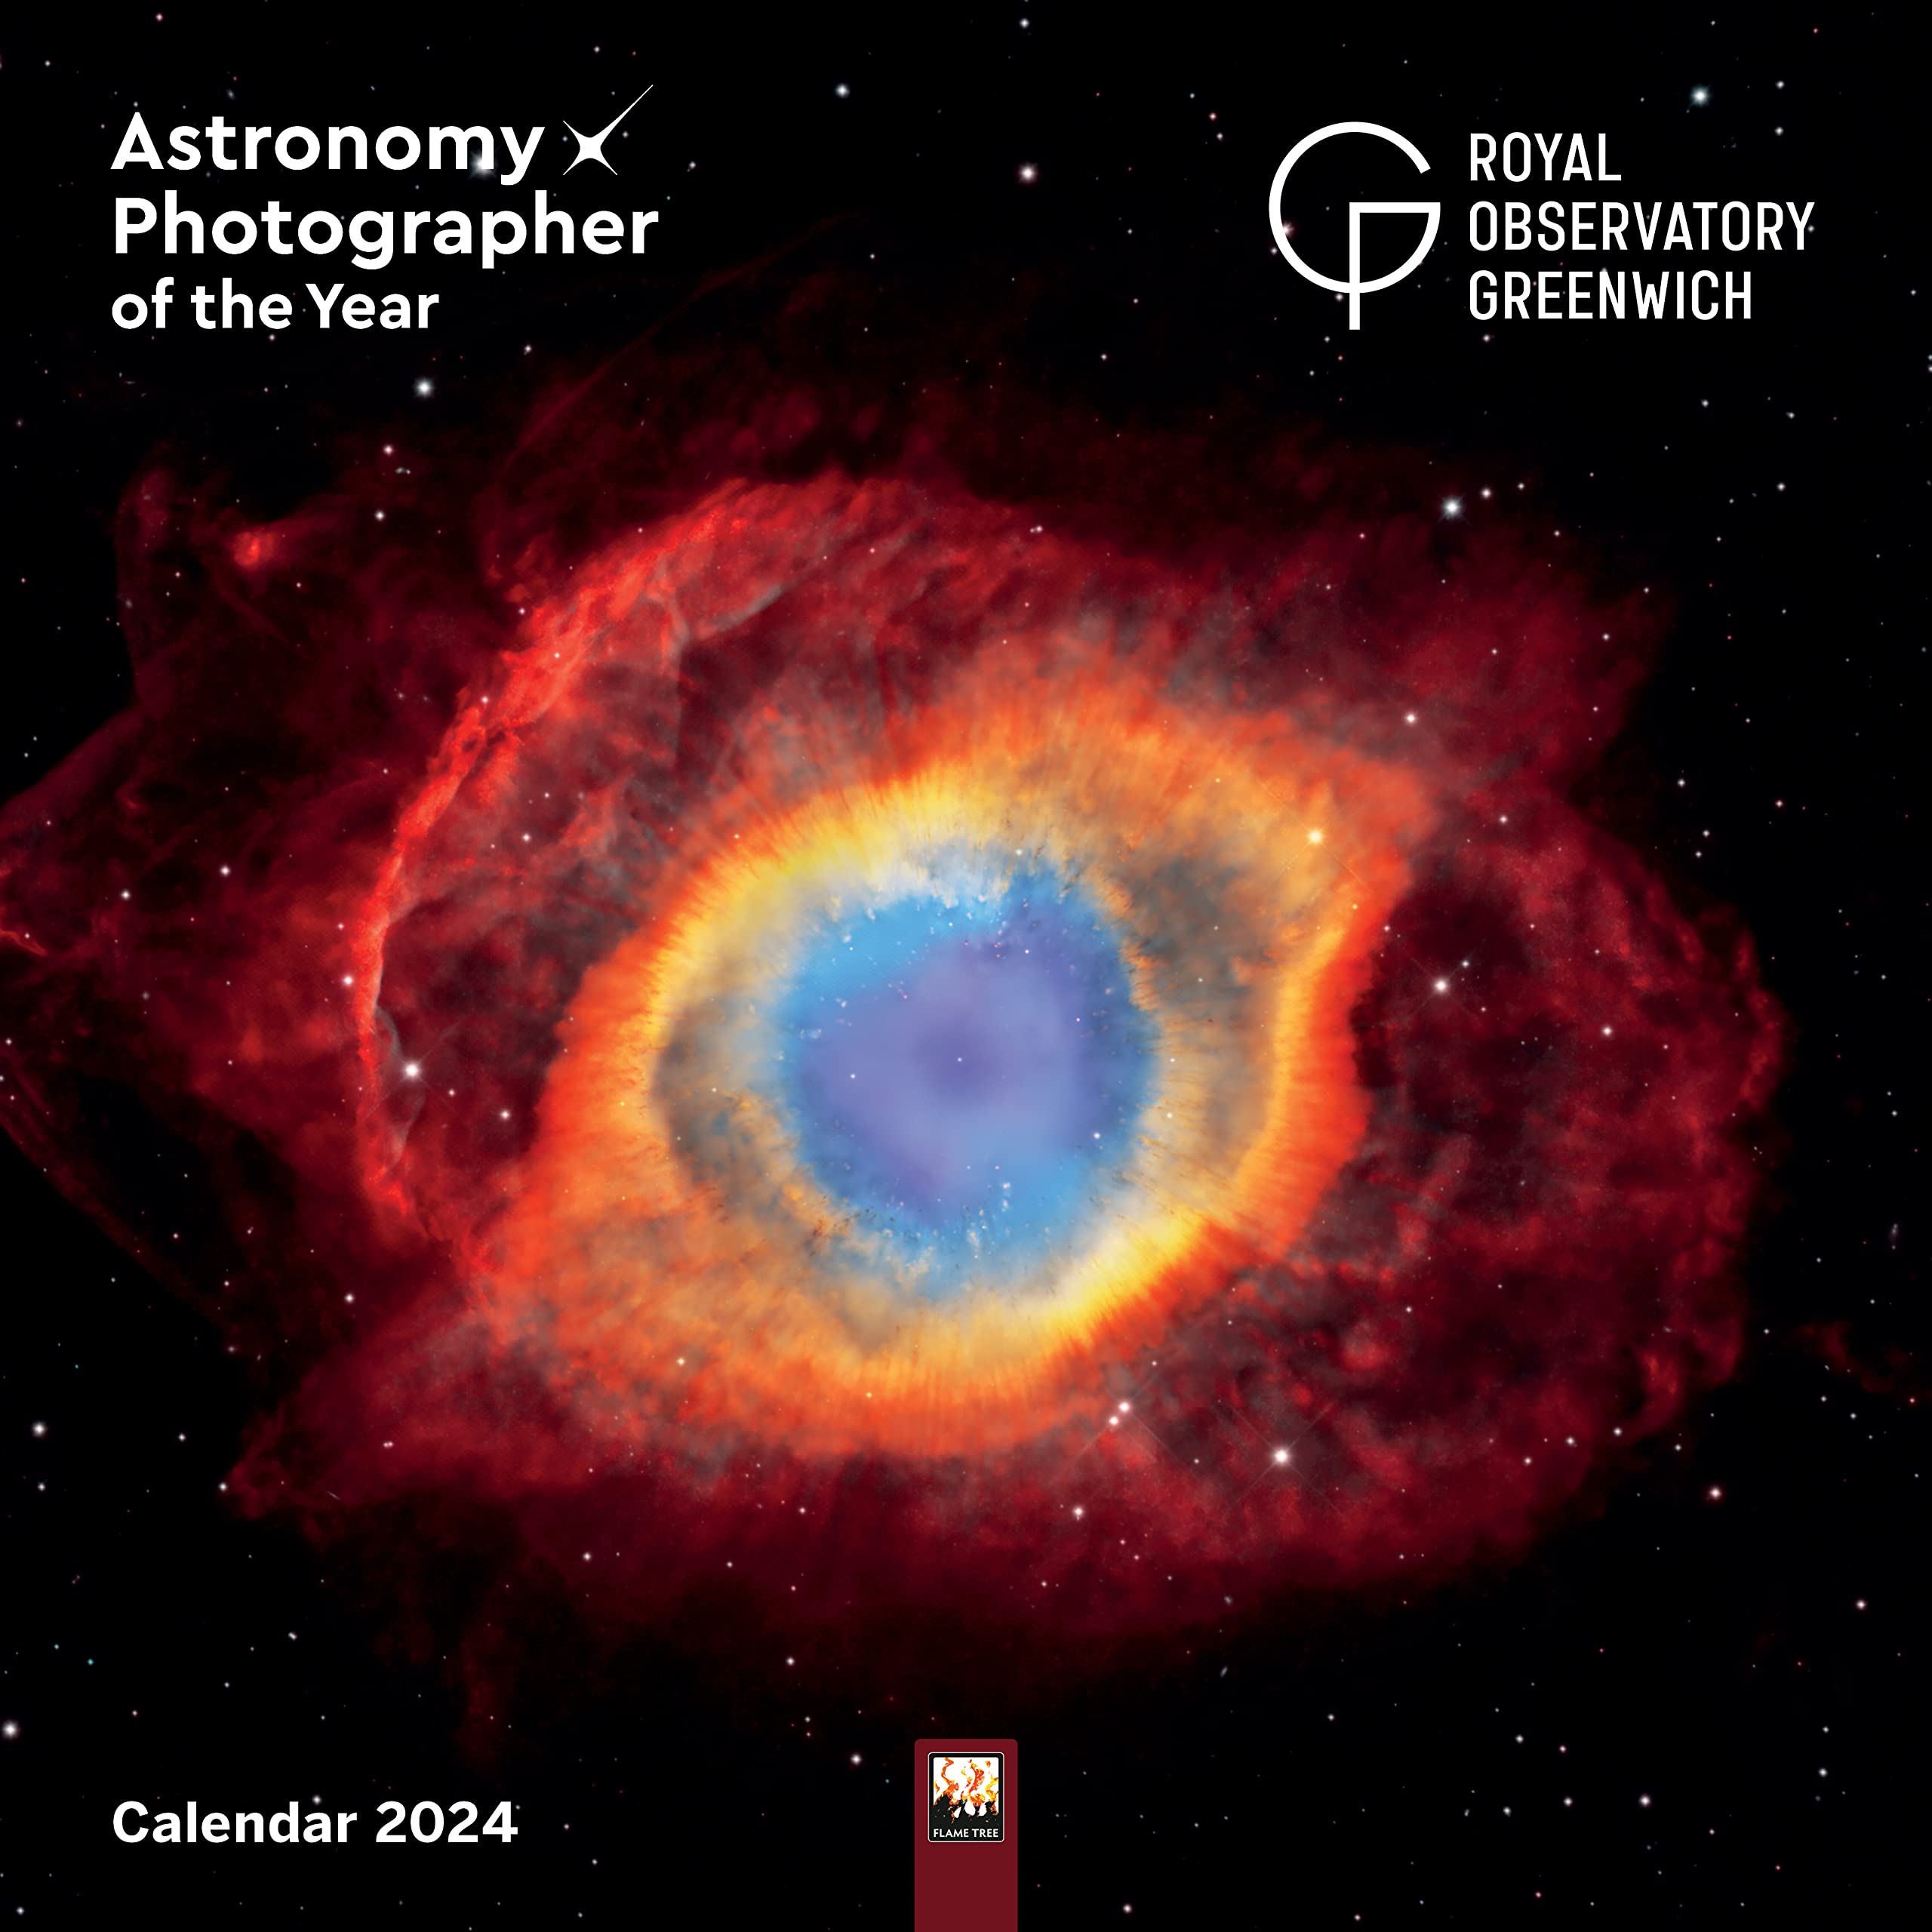 Calendar 2024 - Royal Observatory Greenwich: Astronomy Photographer of the Year | Flame Tree Studio